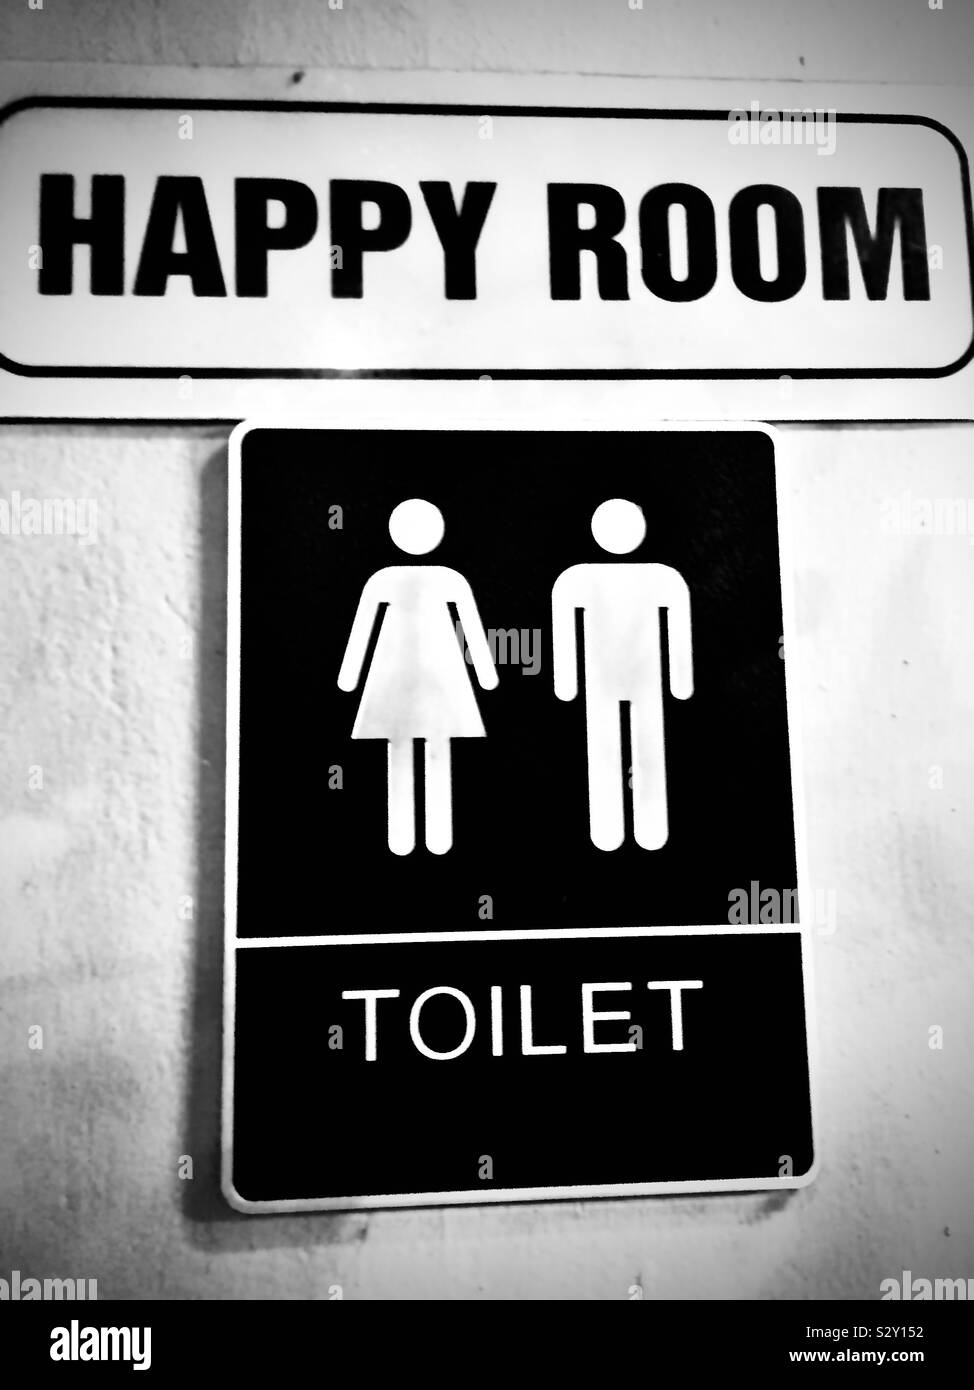 Happiness is relief. Sign to restroom, aka the happy room Stock Photo